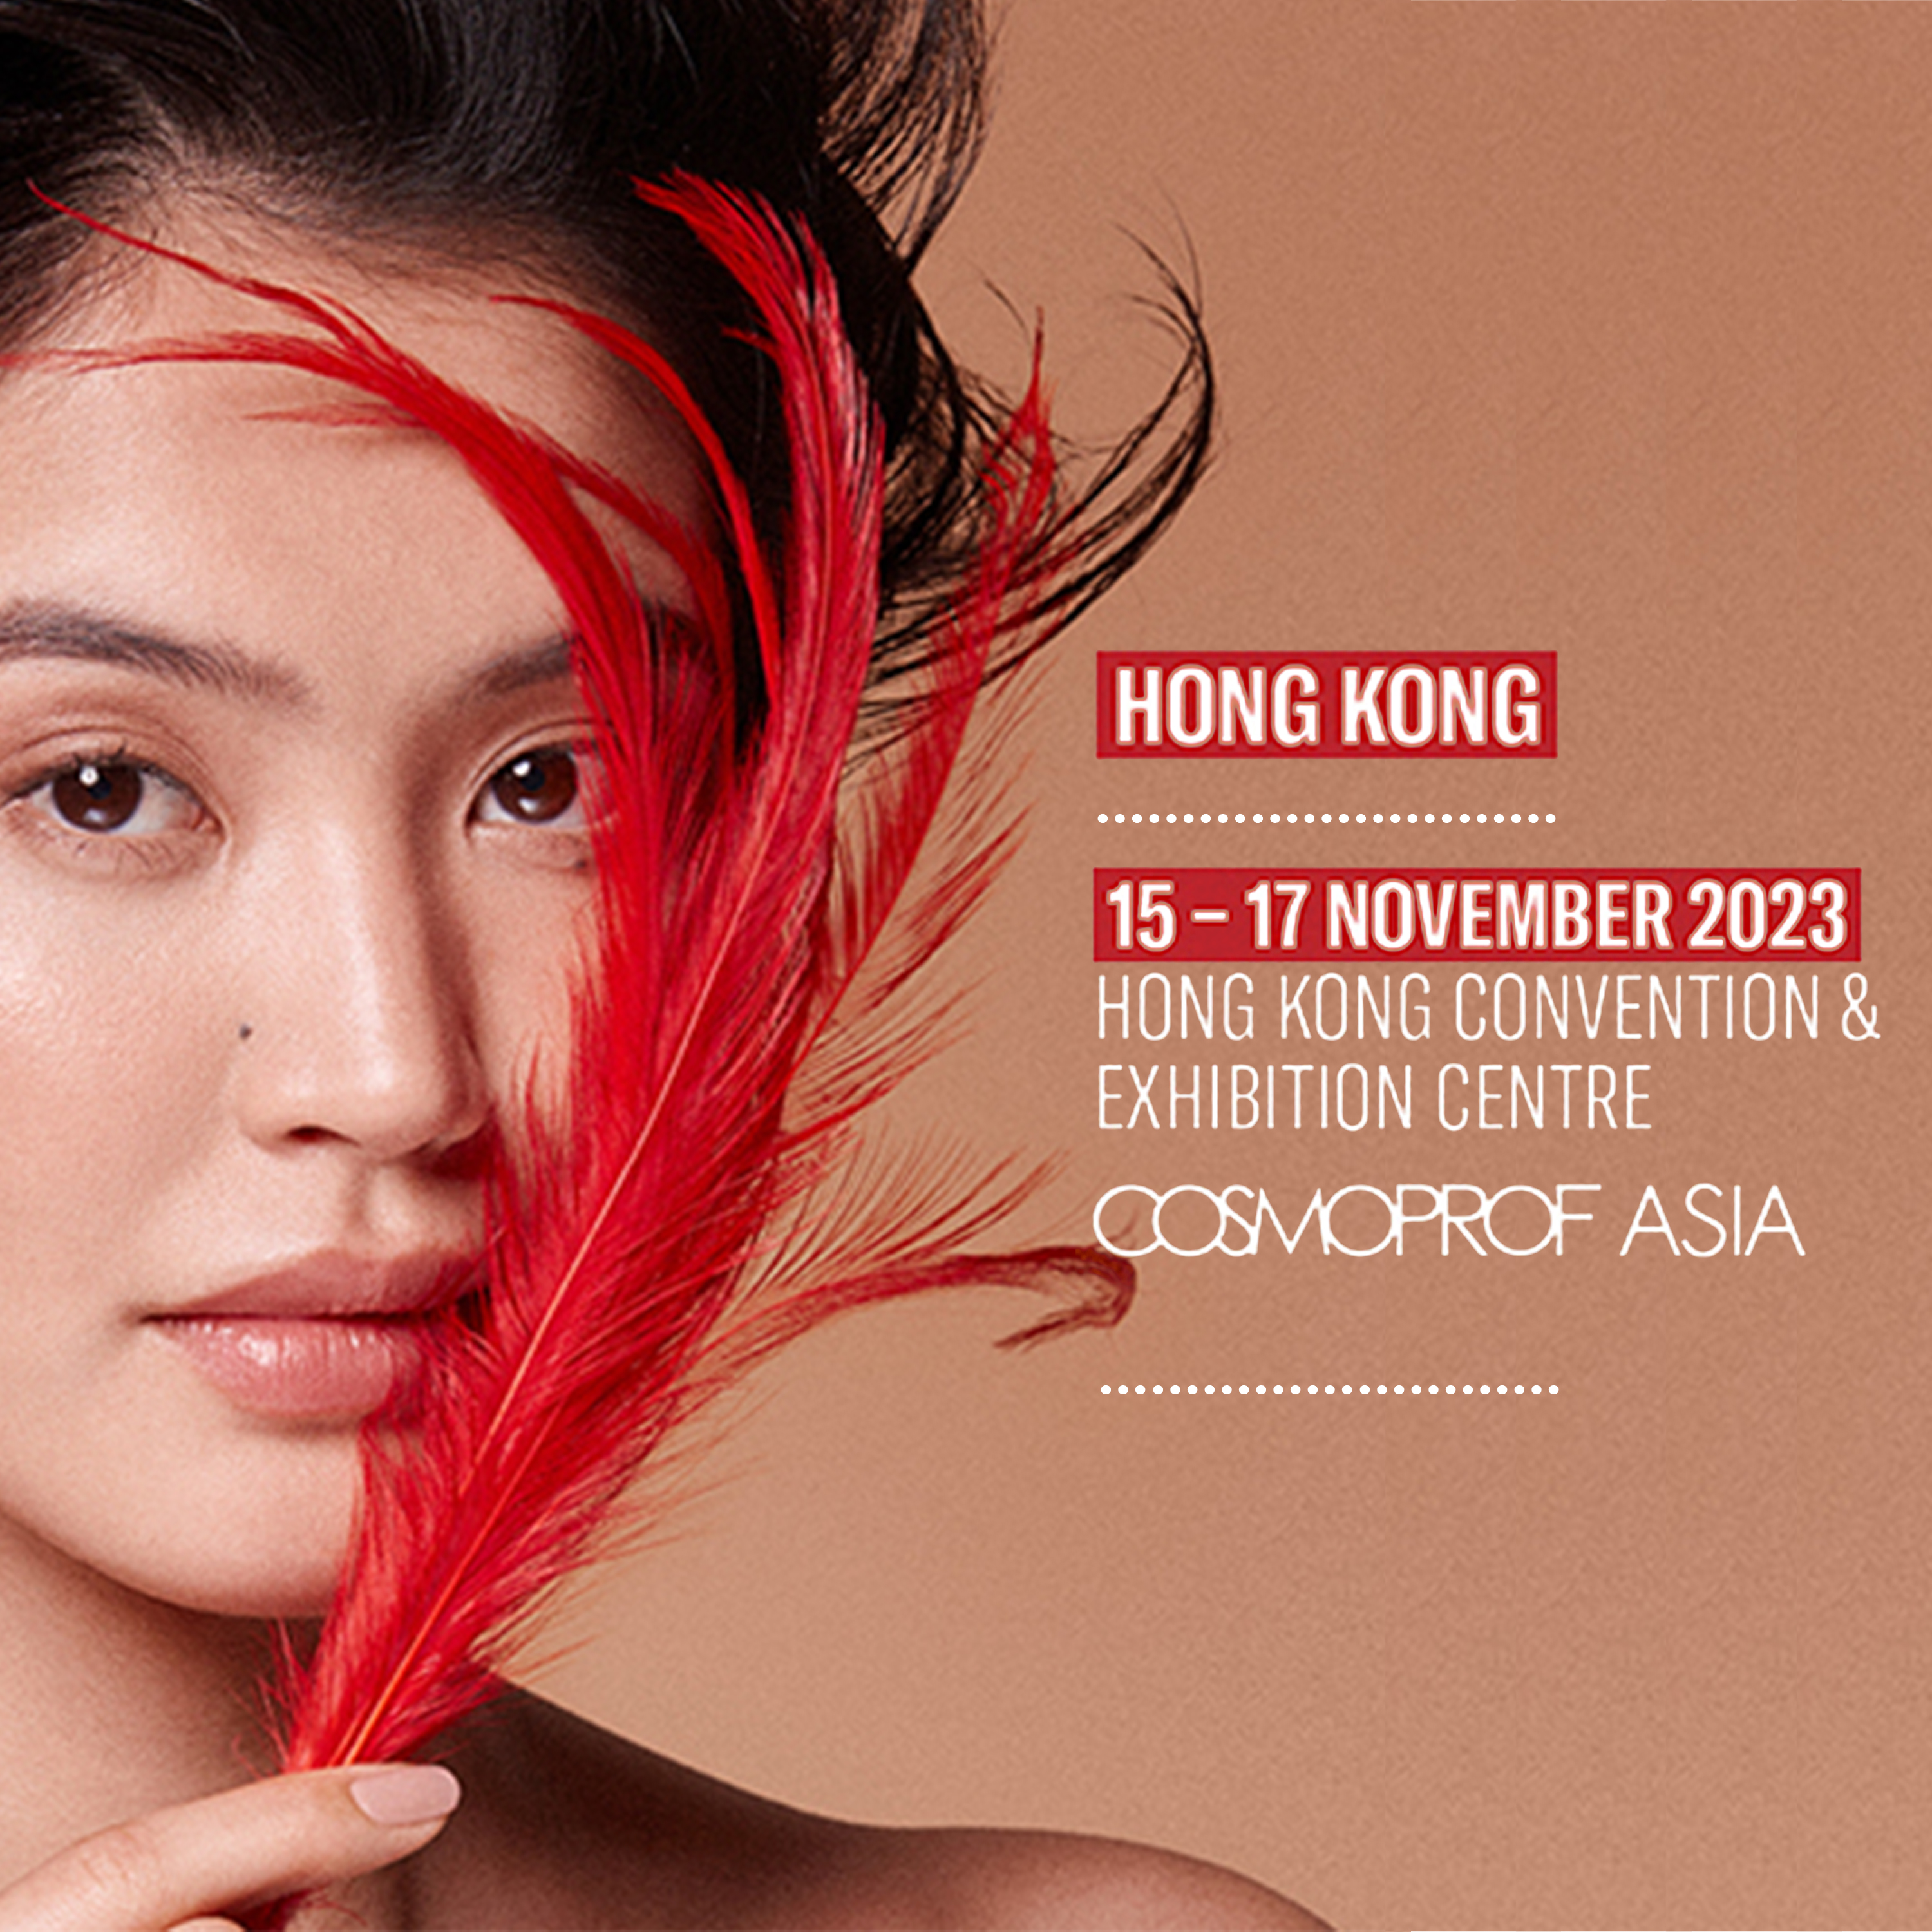 Welcome to 2023 COSMOPROF ASIA in Hong Kong with DongPin!